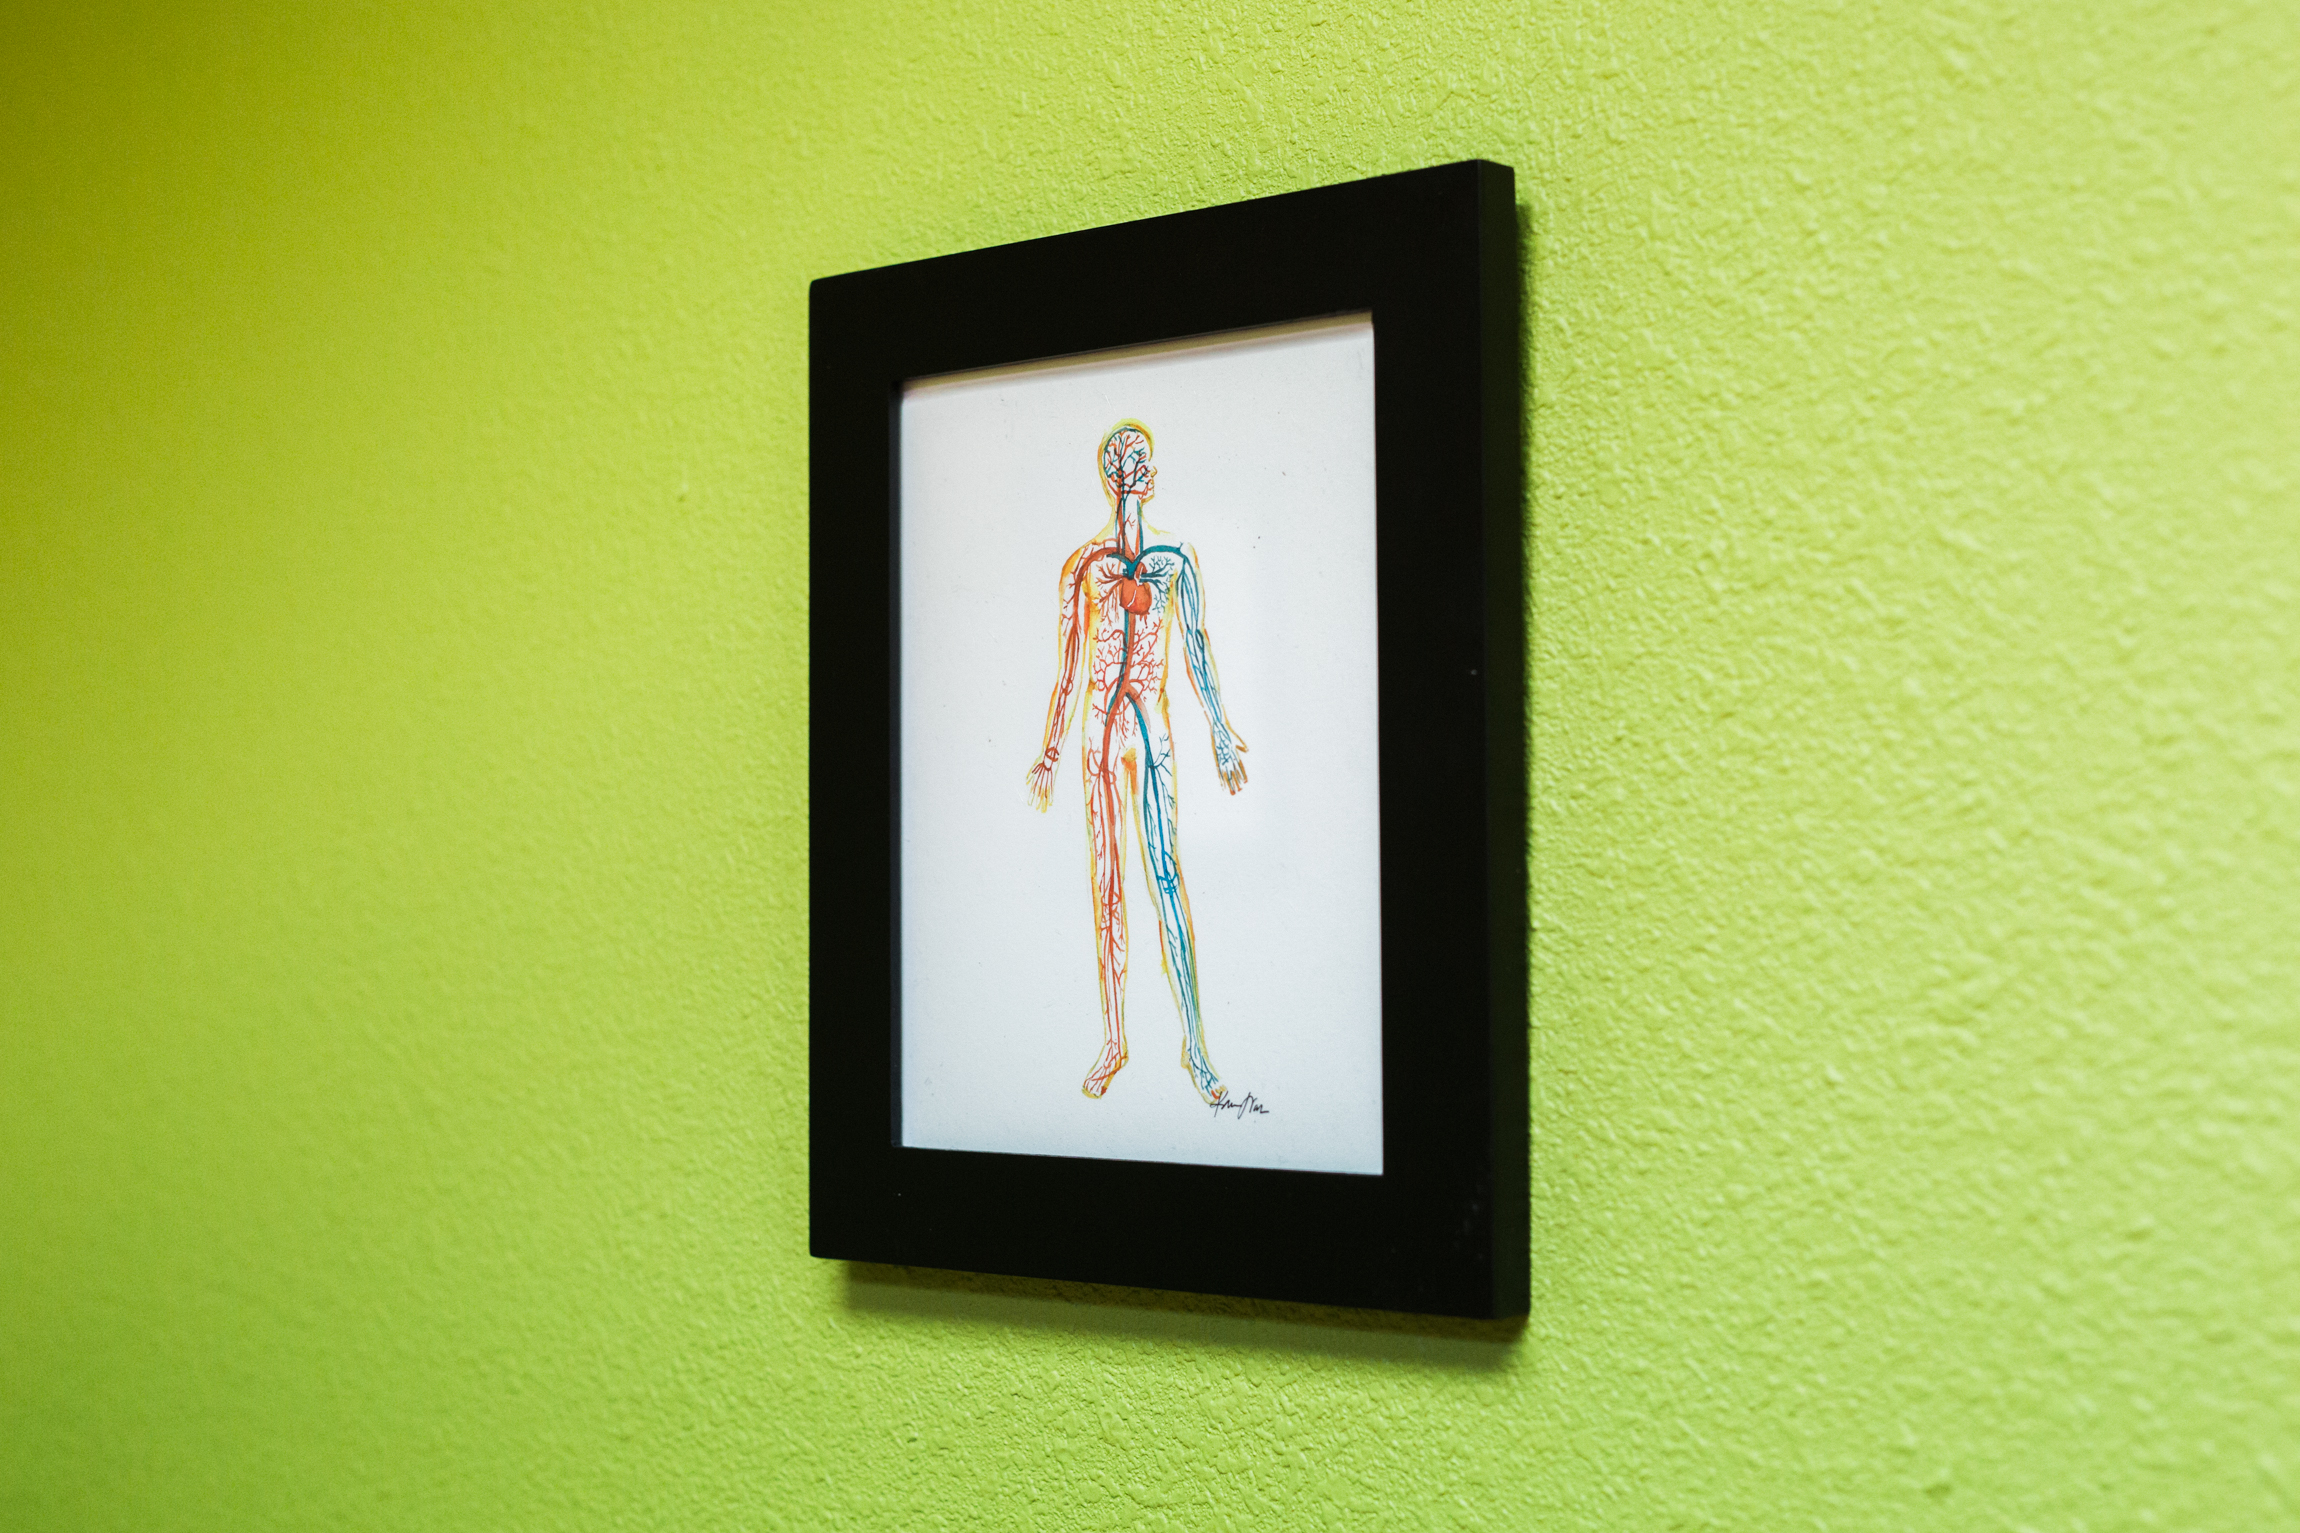  Image features an anatomy illustration which serves as a visual guide to understanding the body's structure and function, from muscle groups to pressure points.  At Mantis Massage in Austin, Texas, we prioritize a comprehensive approach to wellness,